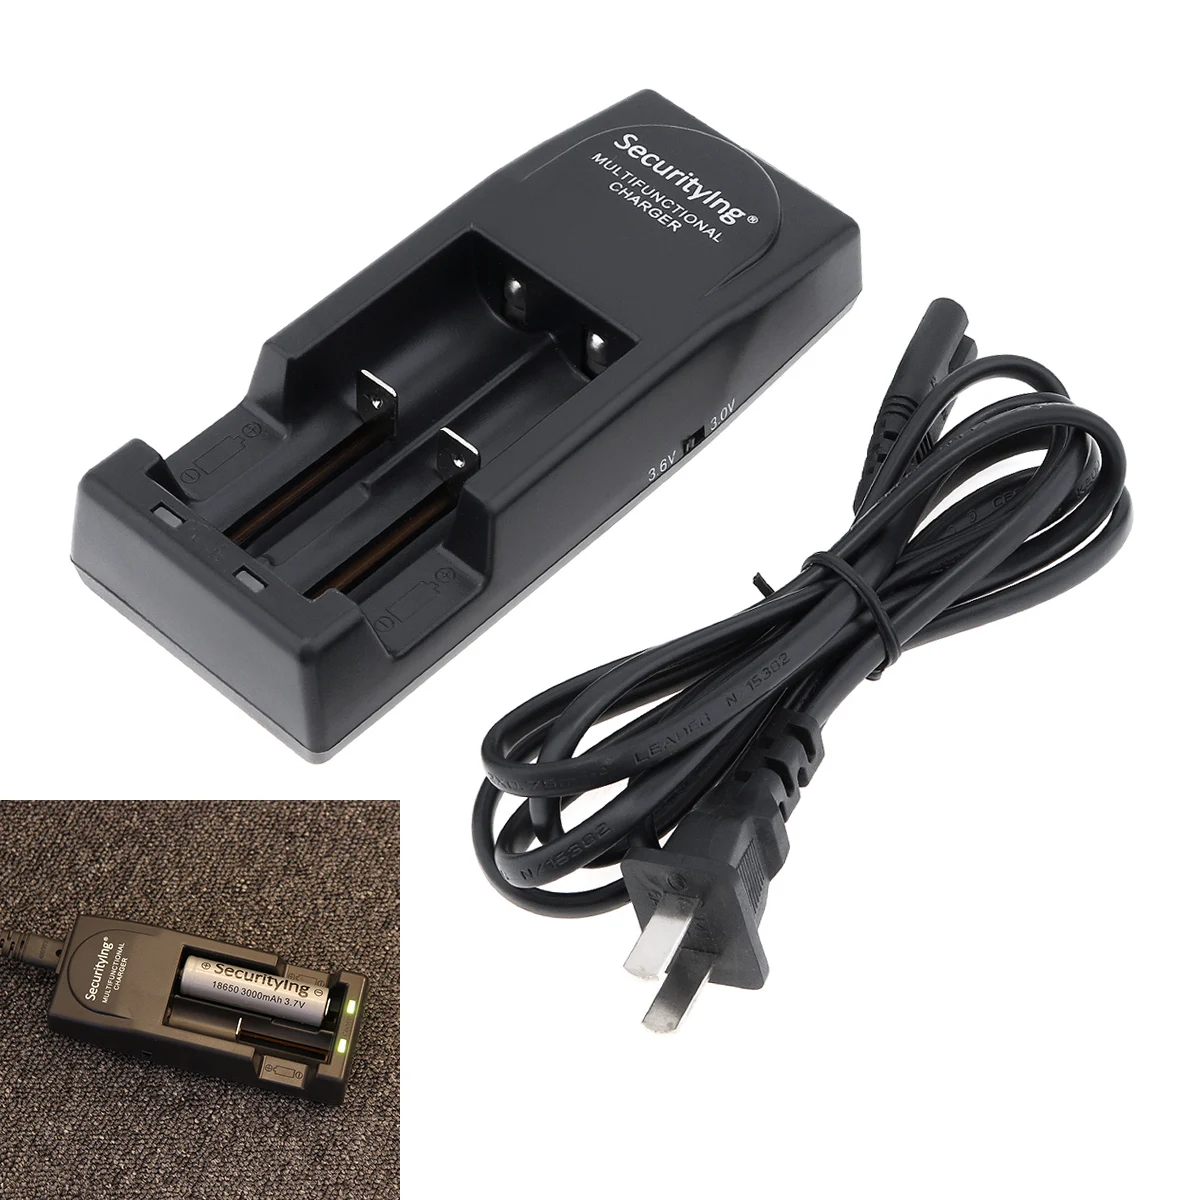 

TR-001 Smart Battery Charger with US/UK/EU AC Plug for 10430/10440/14500/16340/17670/18500/18650 Rechargeable Batteries